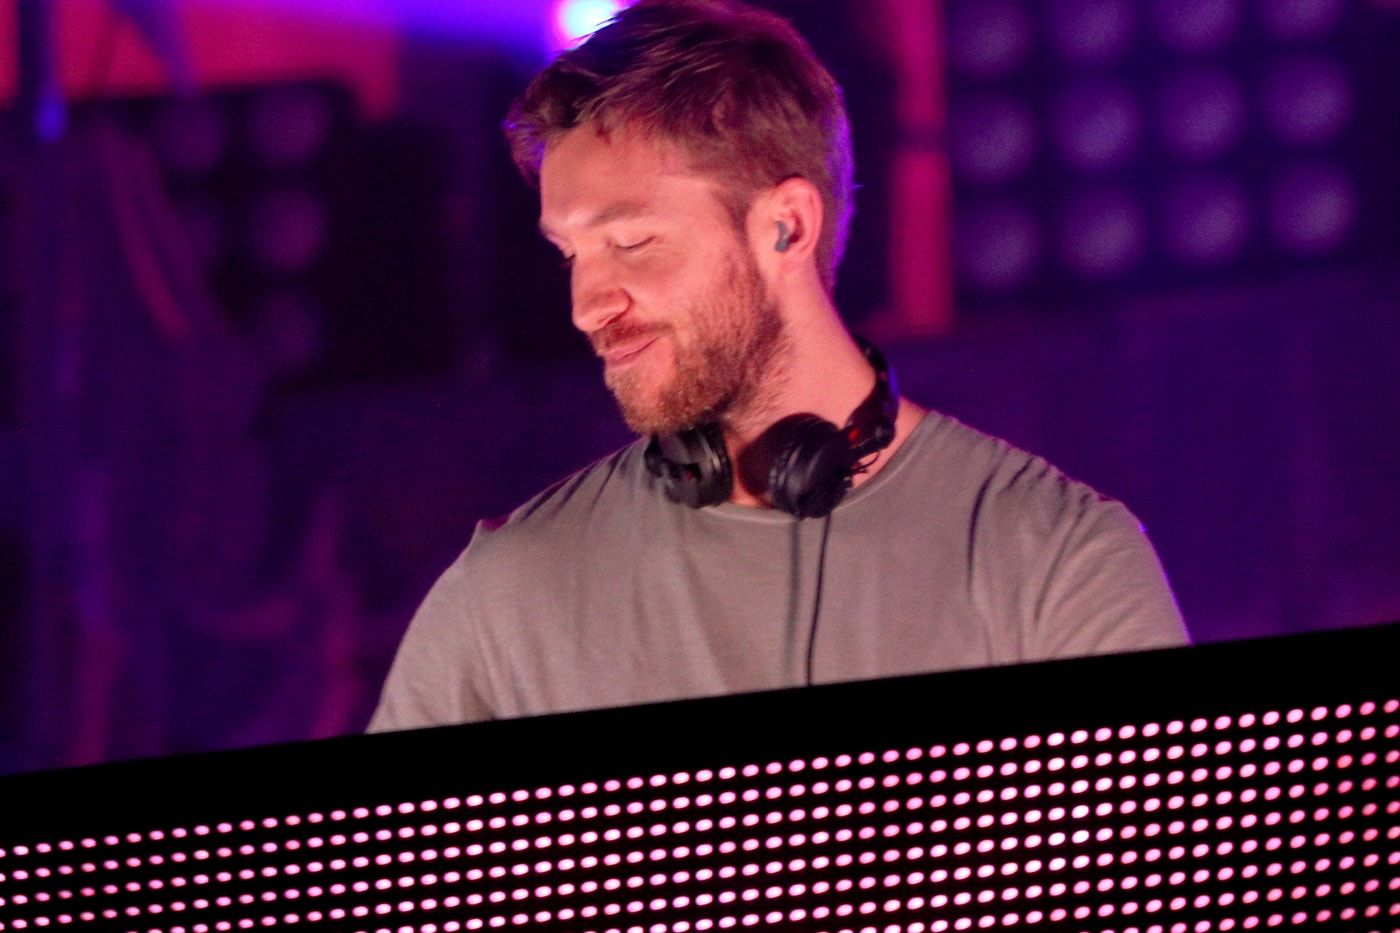  calvin-harris-wants-to-collaborate-kanye-west